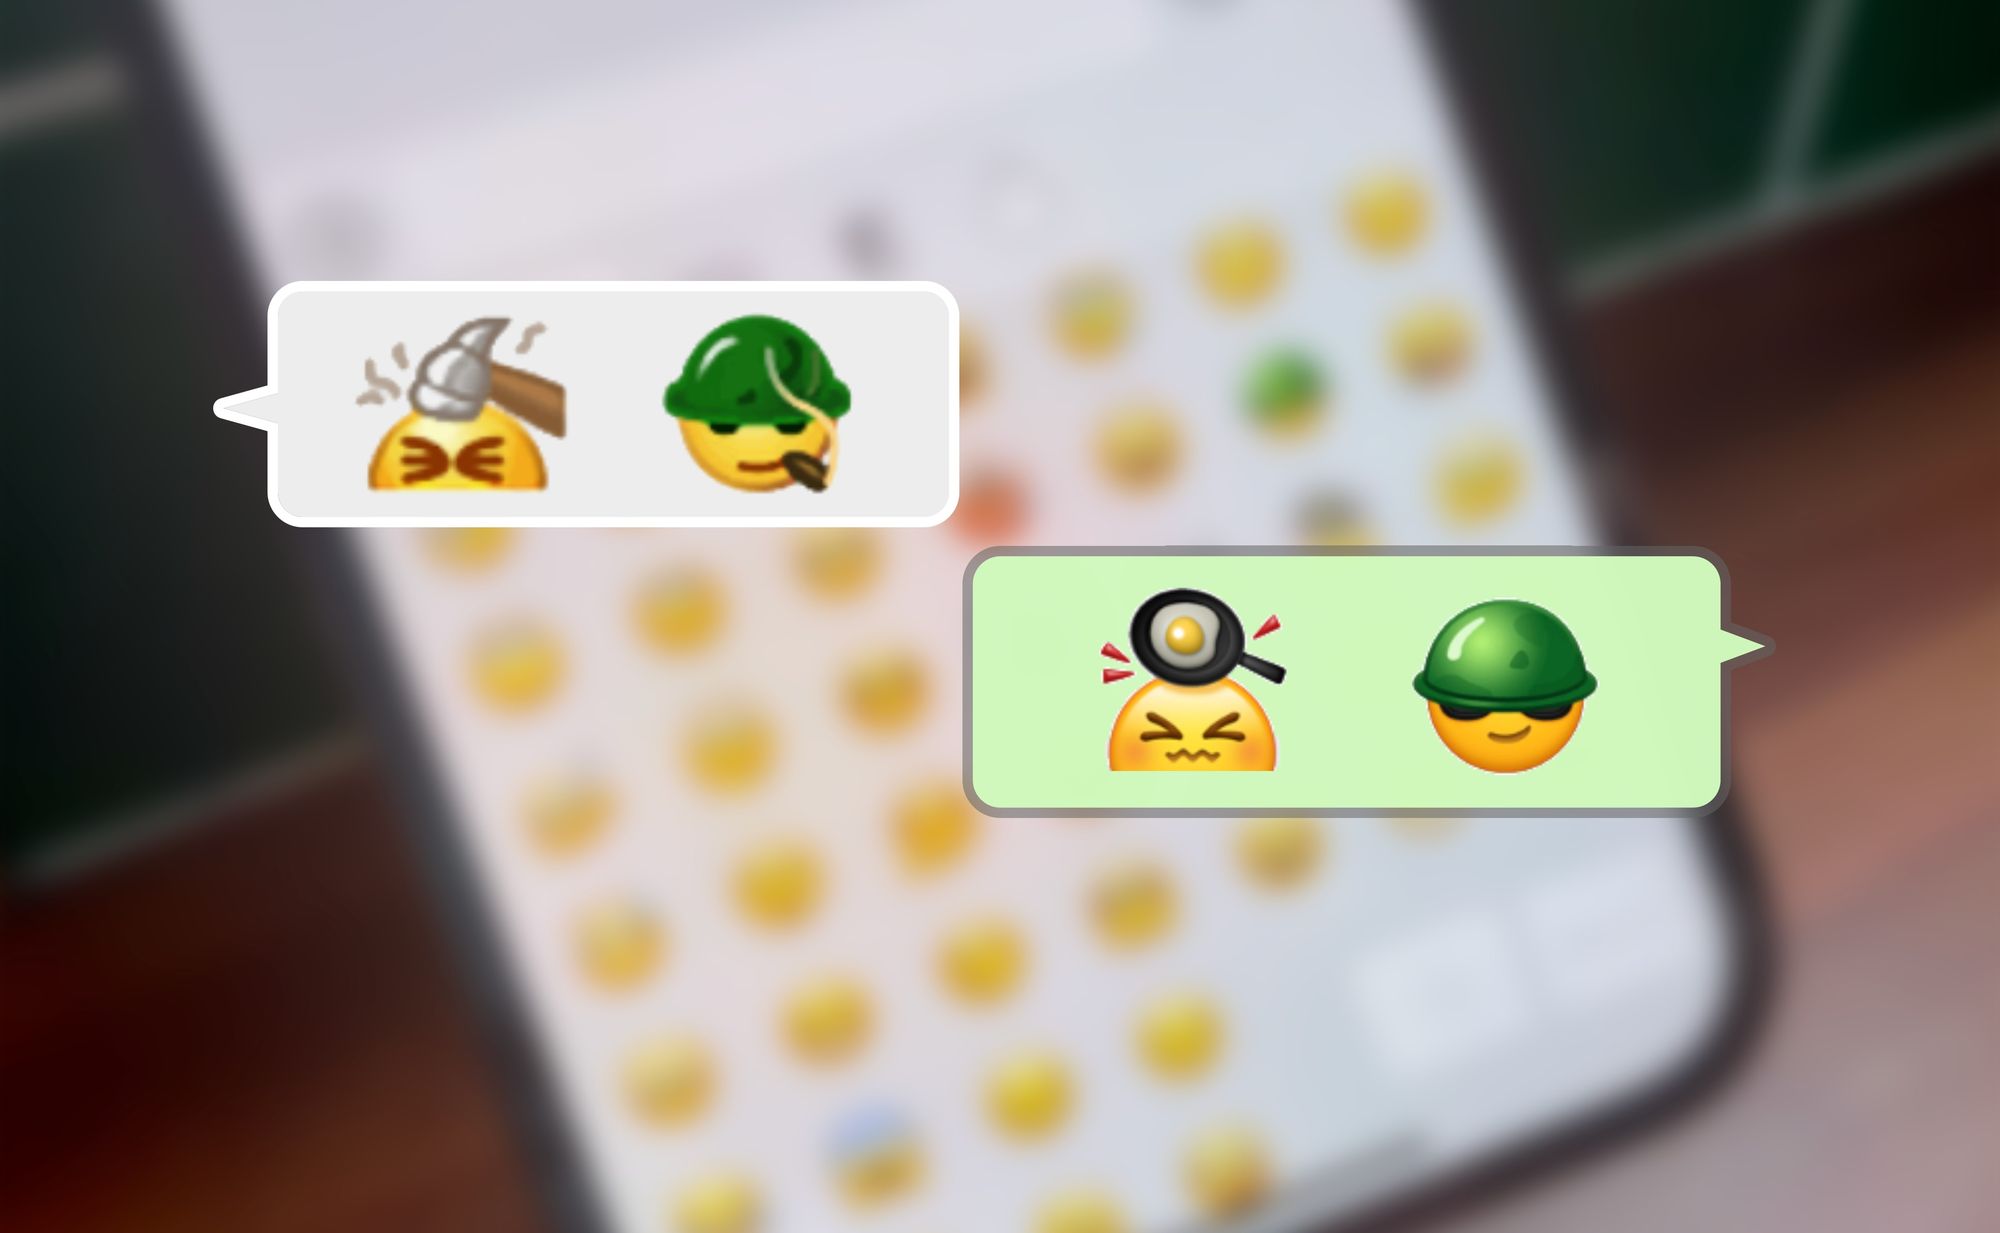 what is the wechat emoji translation